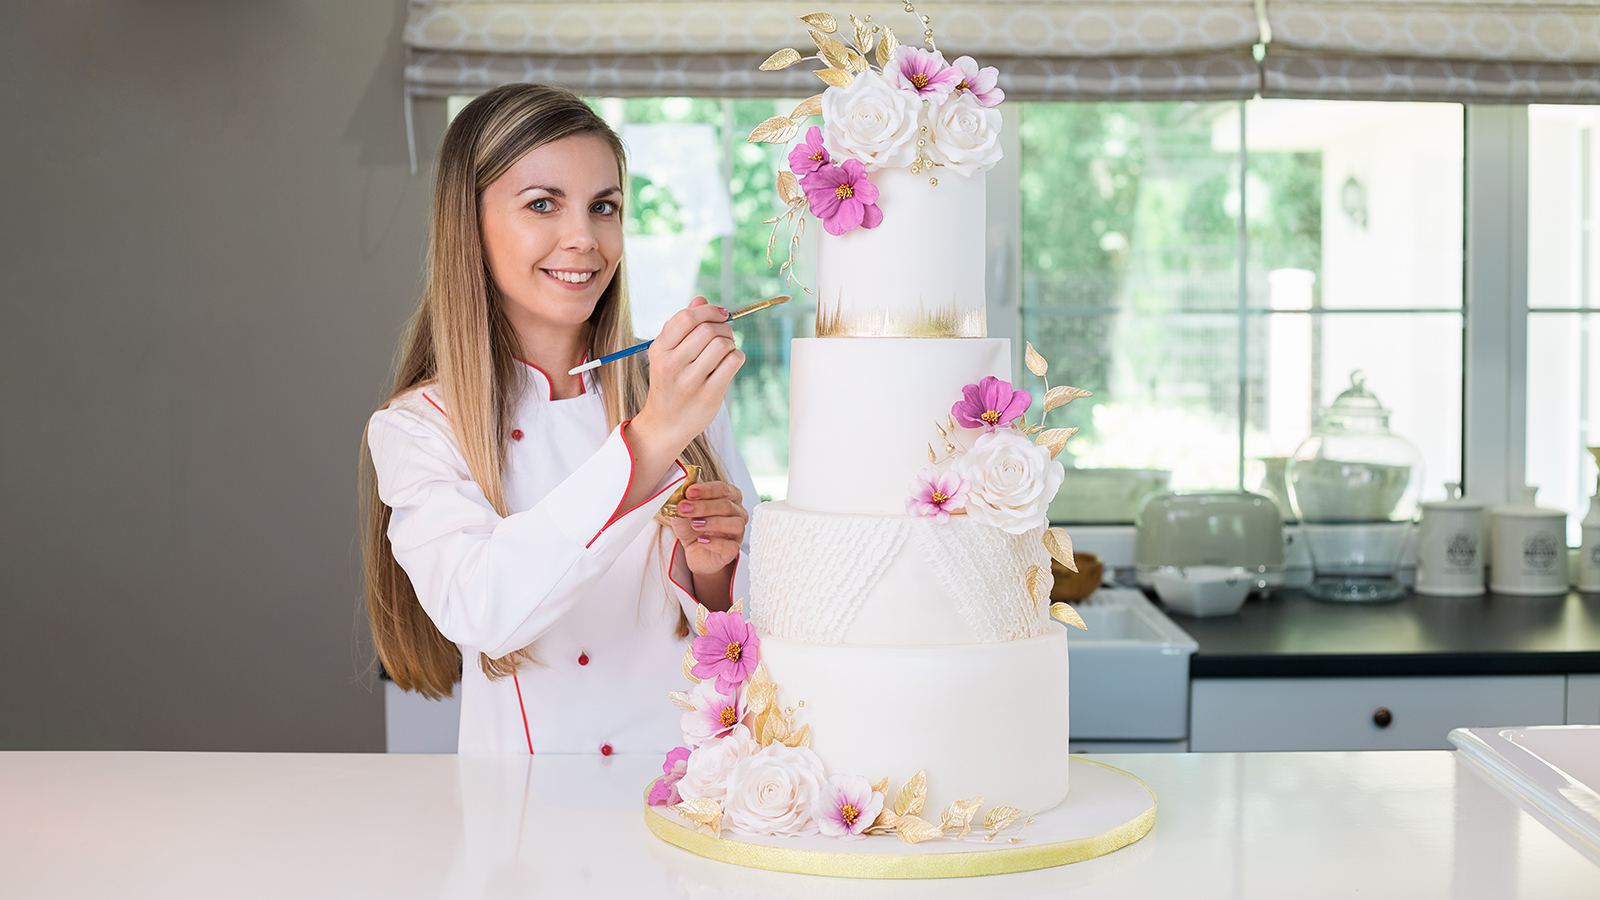 confectioner in chefs uniform standing in the modern kitchen, holding a brush and gold paint, decorating a four tier white, pink and gold wedding cake